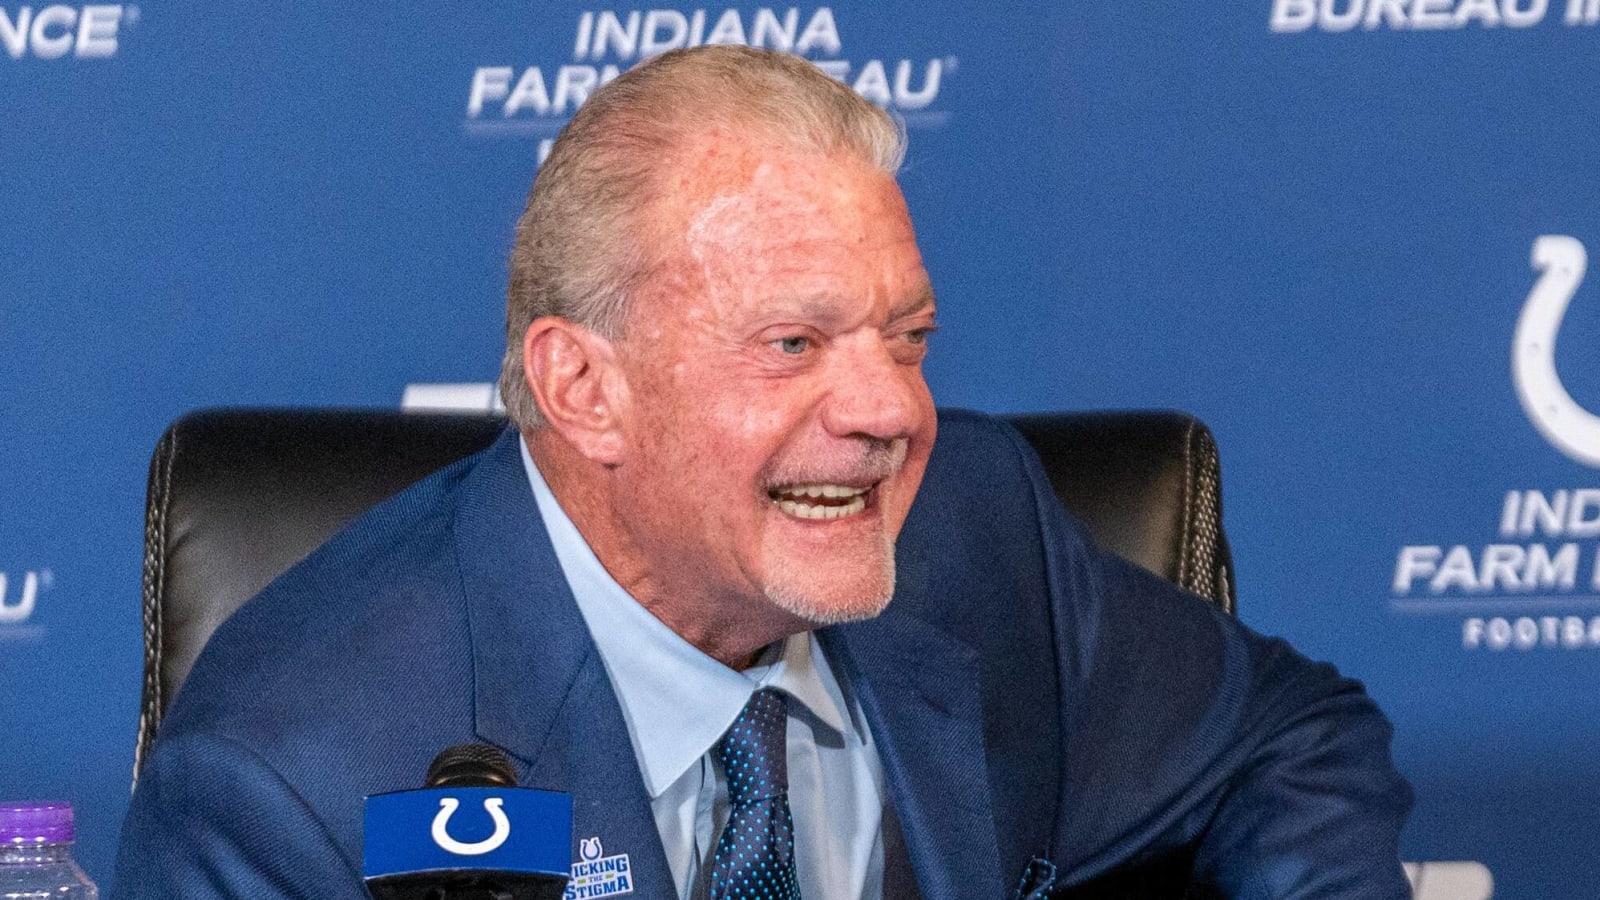 Colts owner Jim Irsay talks up college candidates in coaching search